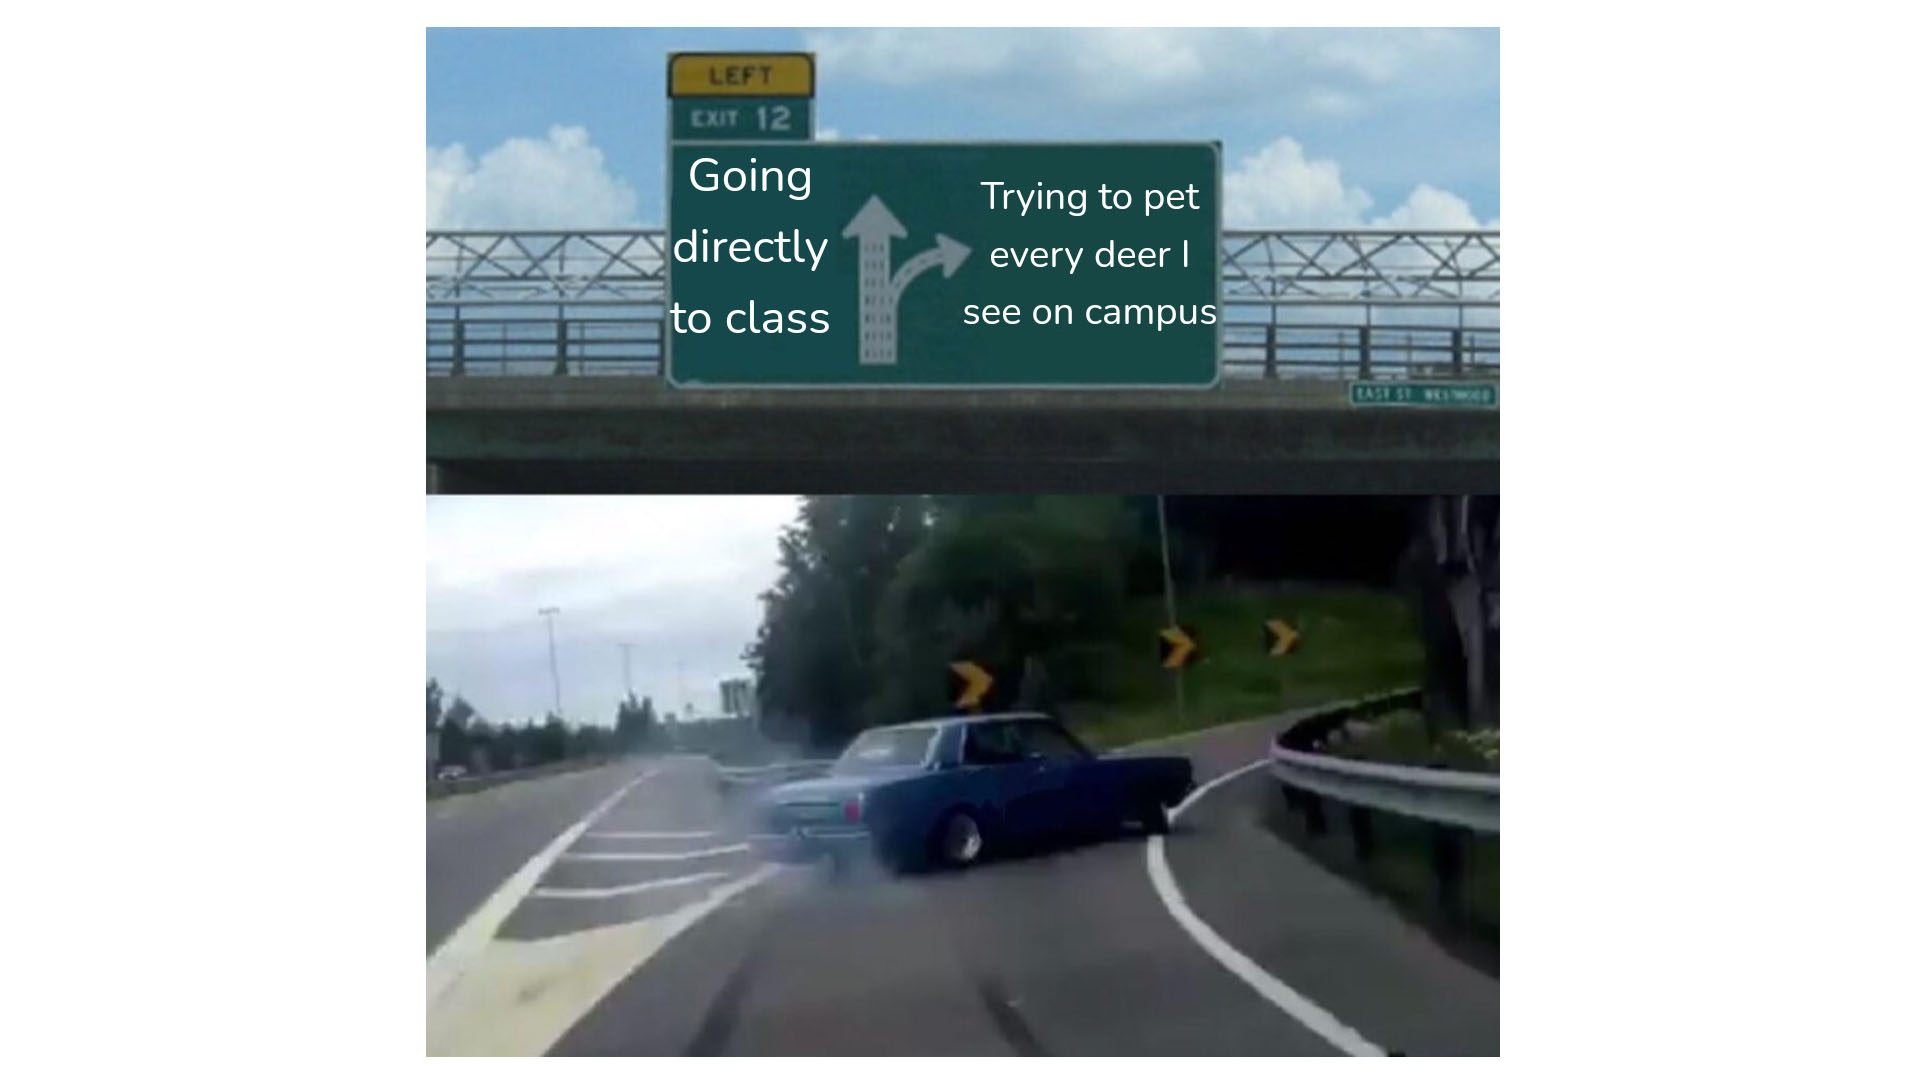 A car drifts off a freeway towards a sign that says "trying to pet every deer I see on campus". Another part of the sign says "Going directly to class"